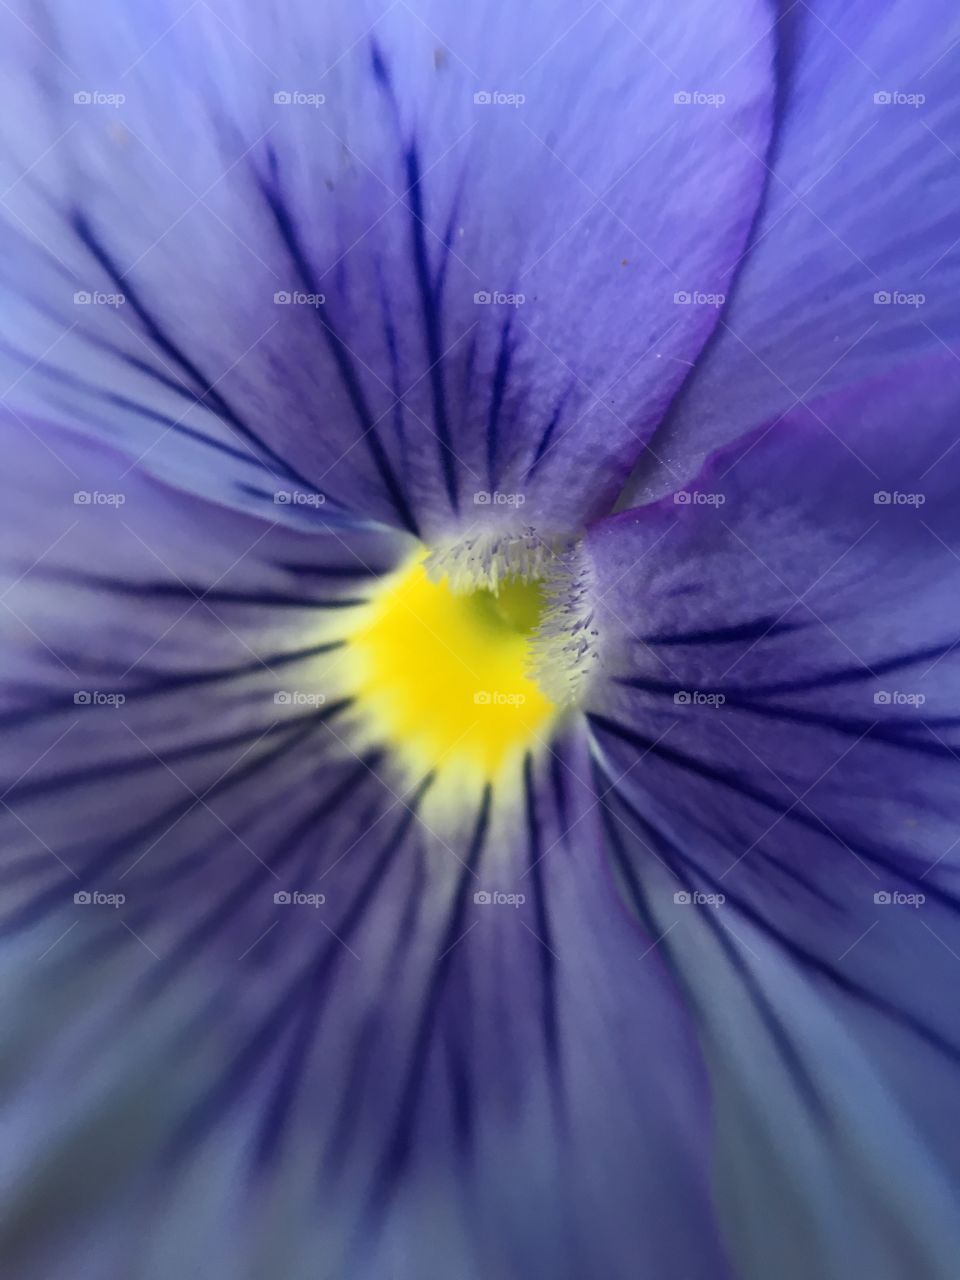 violet flower with yellow core
